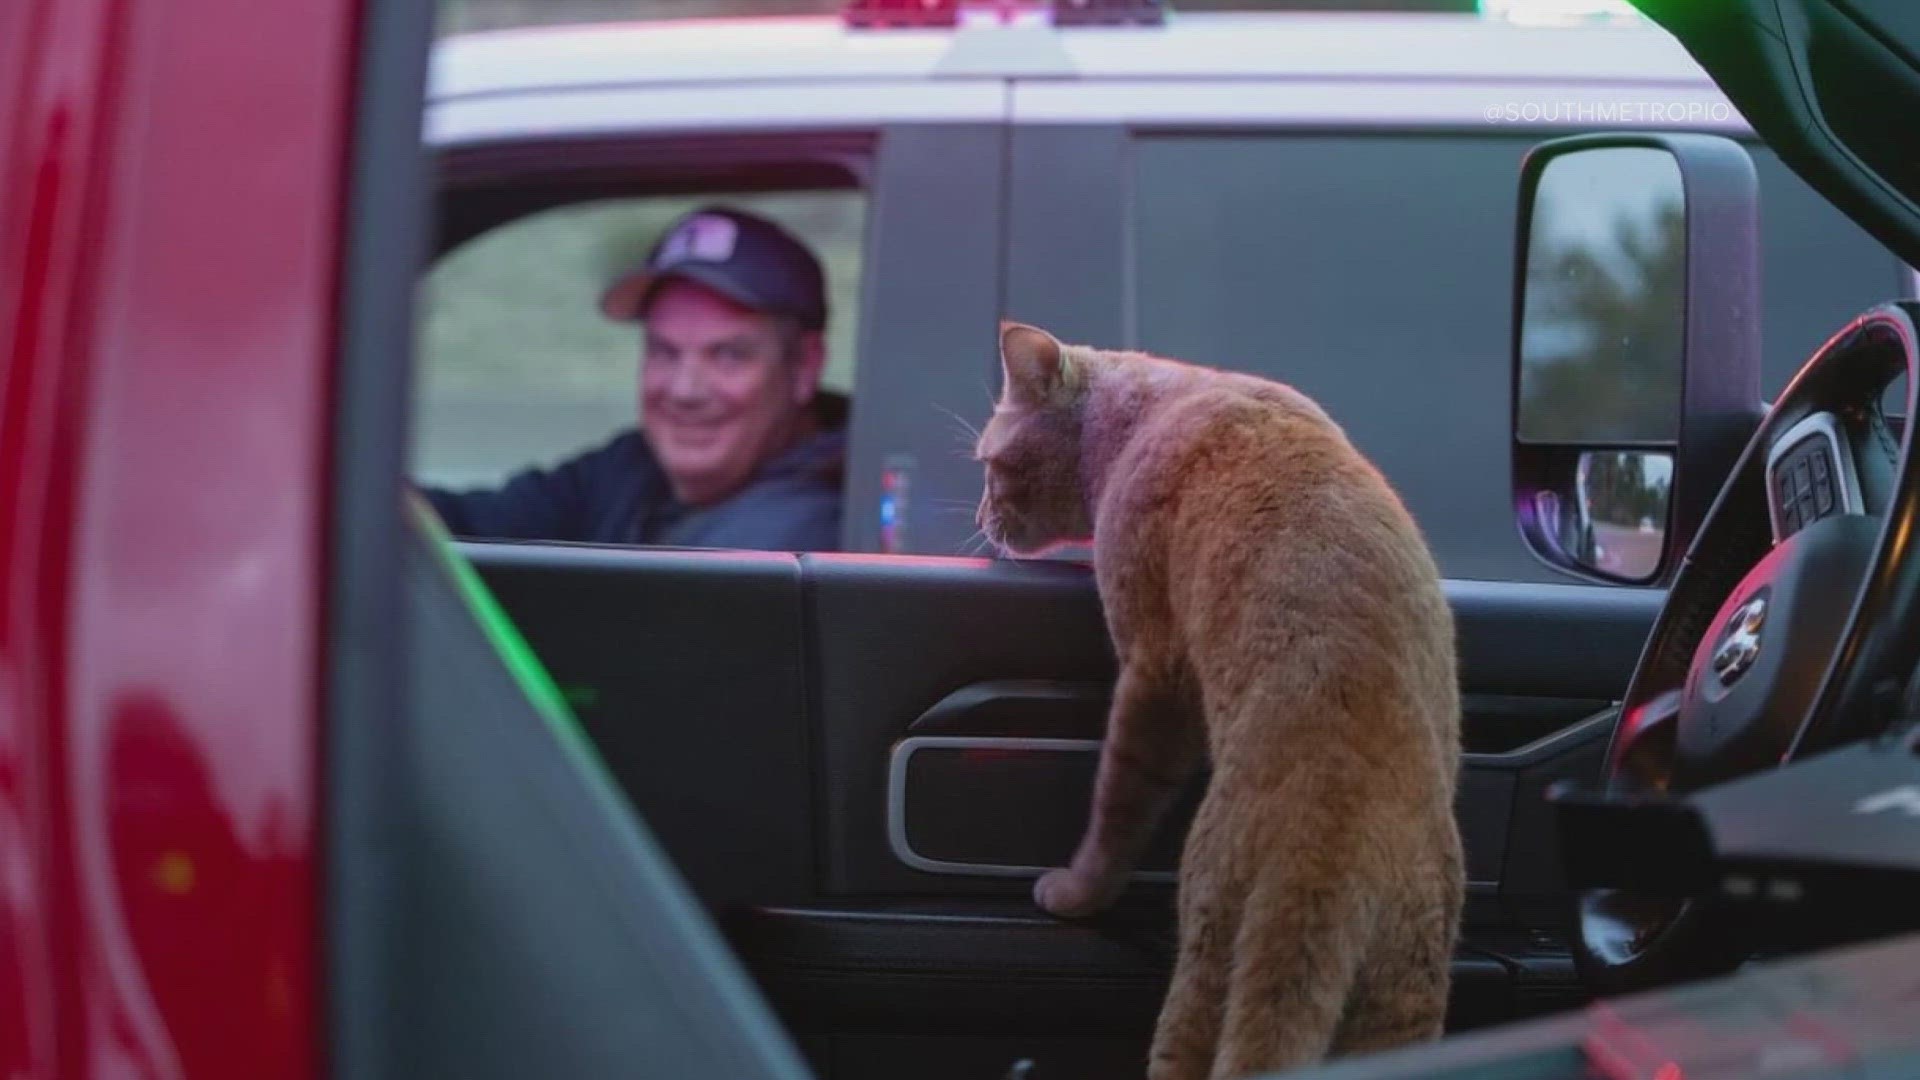 When an orange cat showed up on a South Metro Fire scene, firefighters helped him out – then adopted it and called it "Hazi."